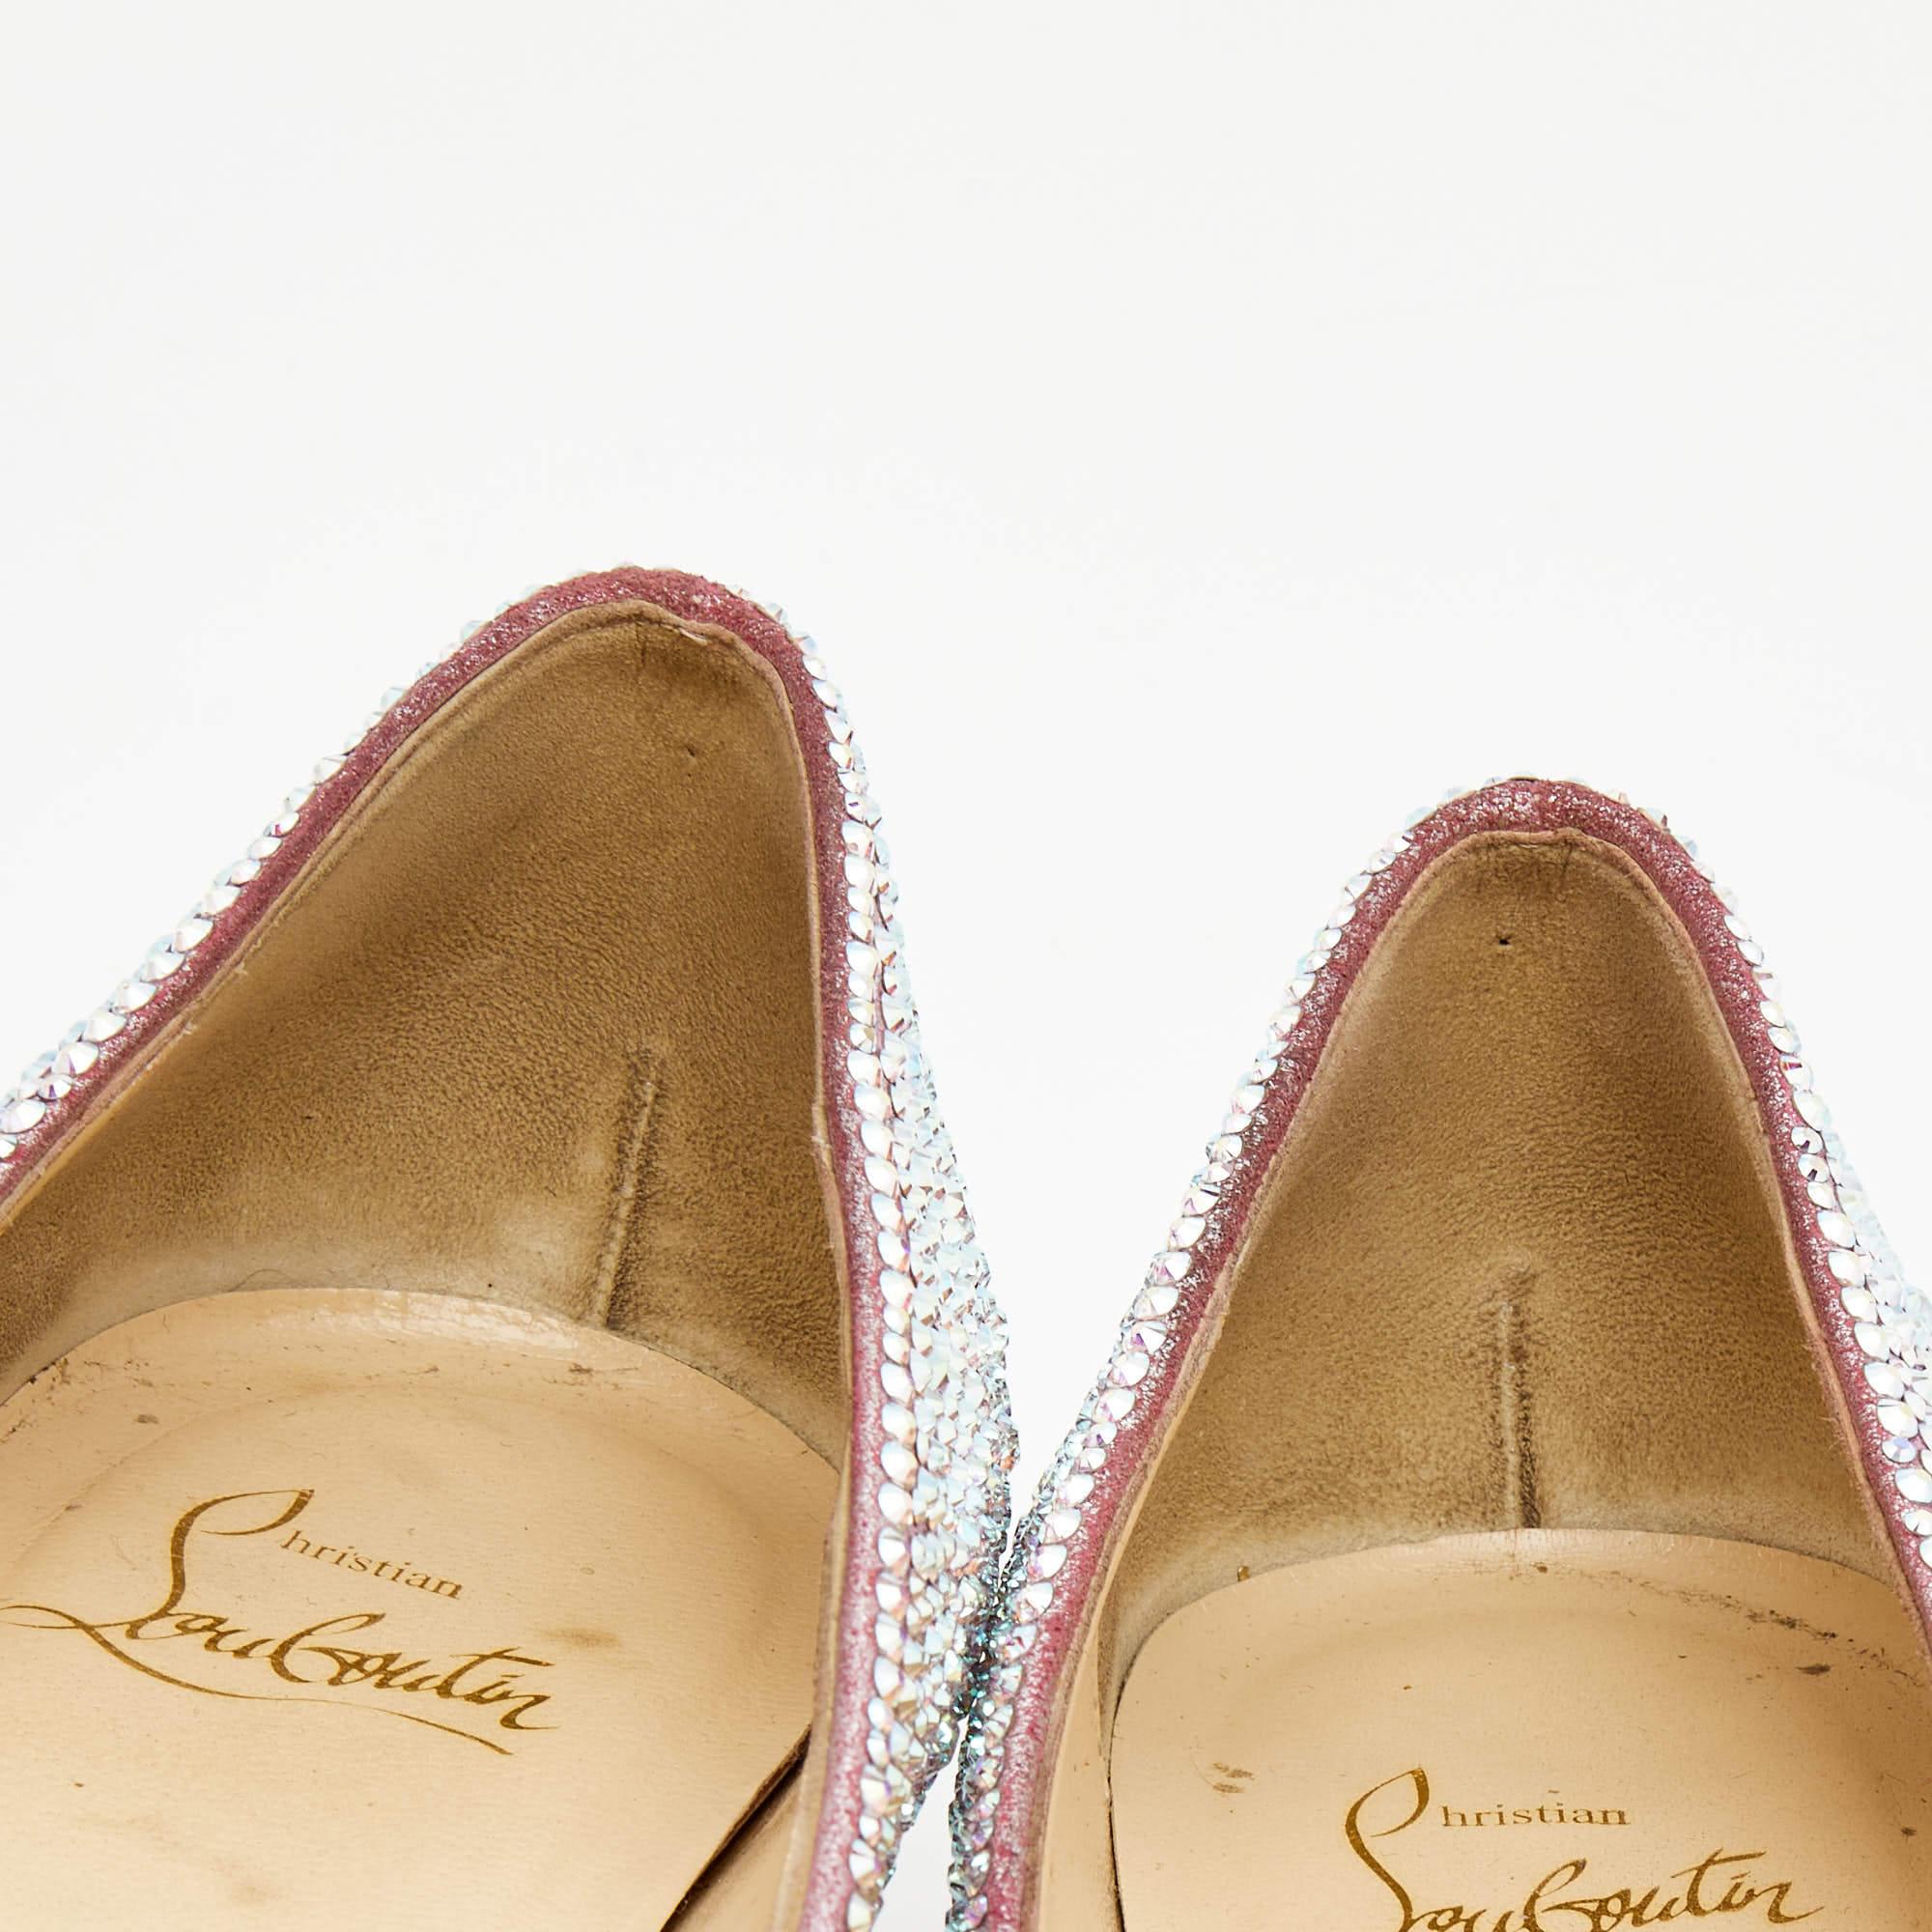 Christian Louboutin Metallic Two Tone Leather Kate Strass Pumps Size 38 For Sale 4